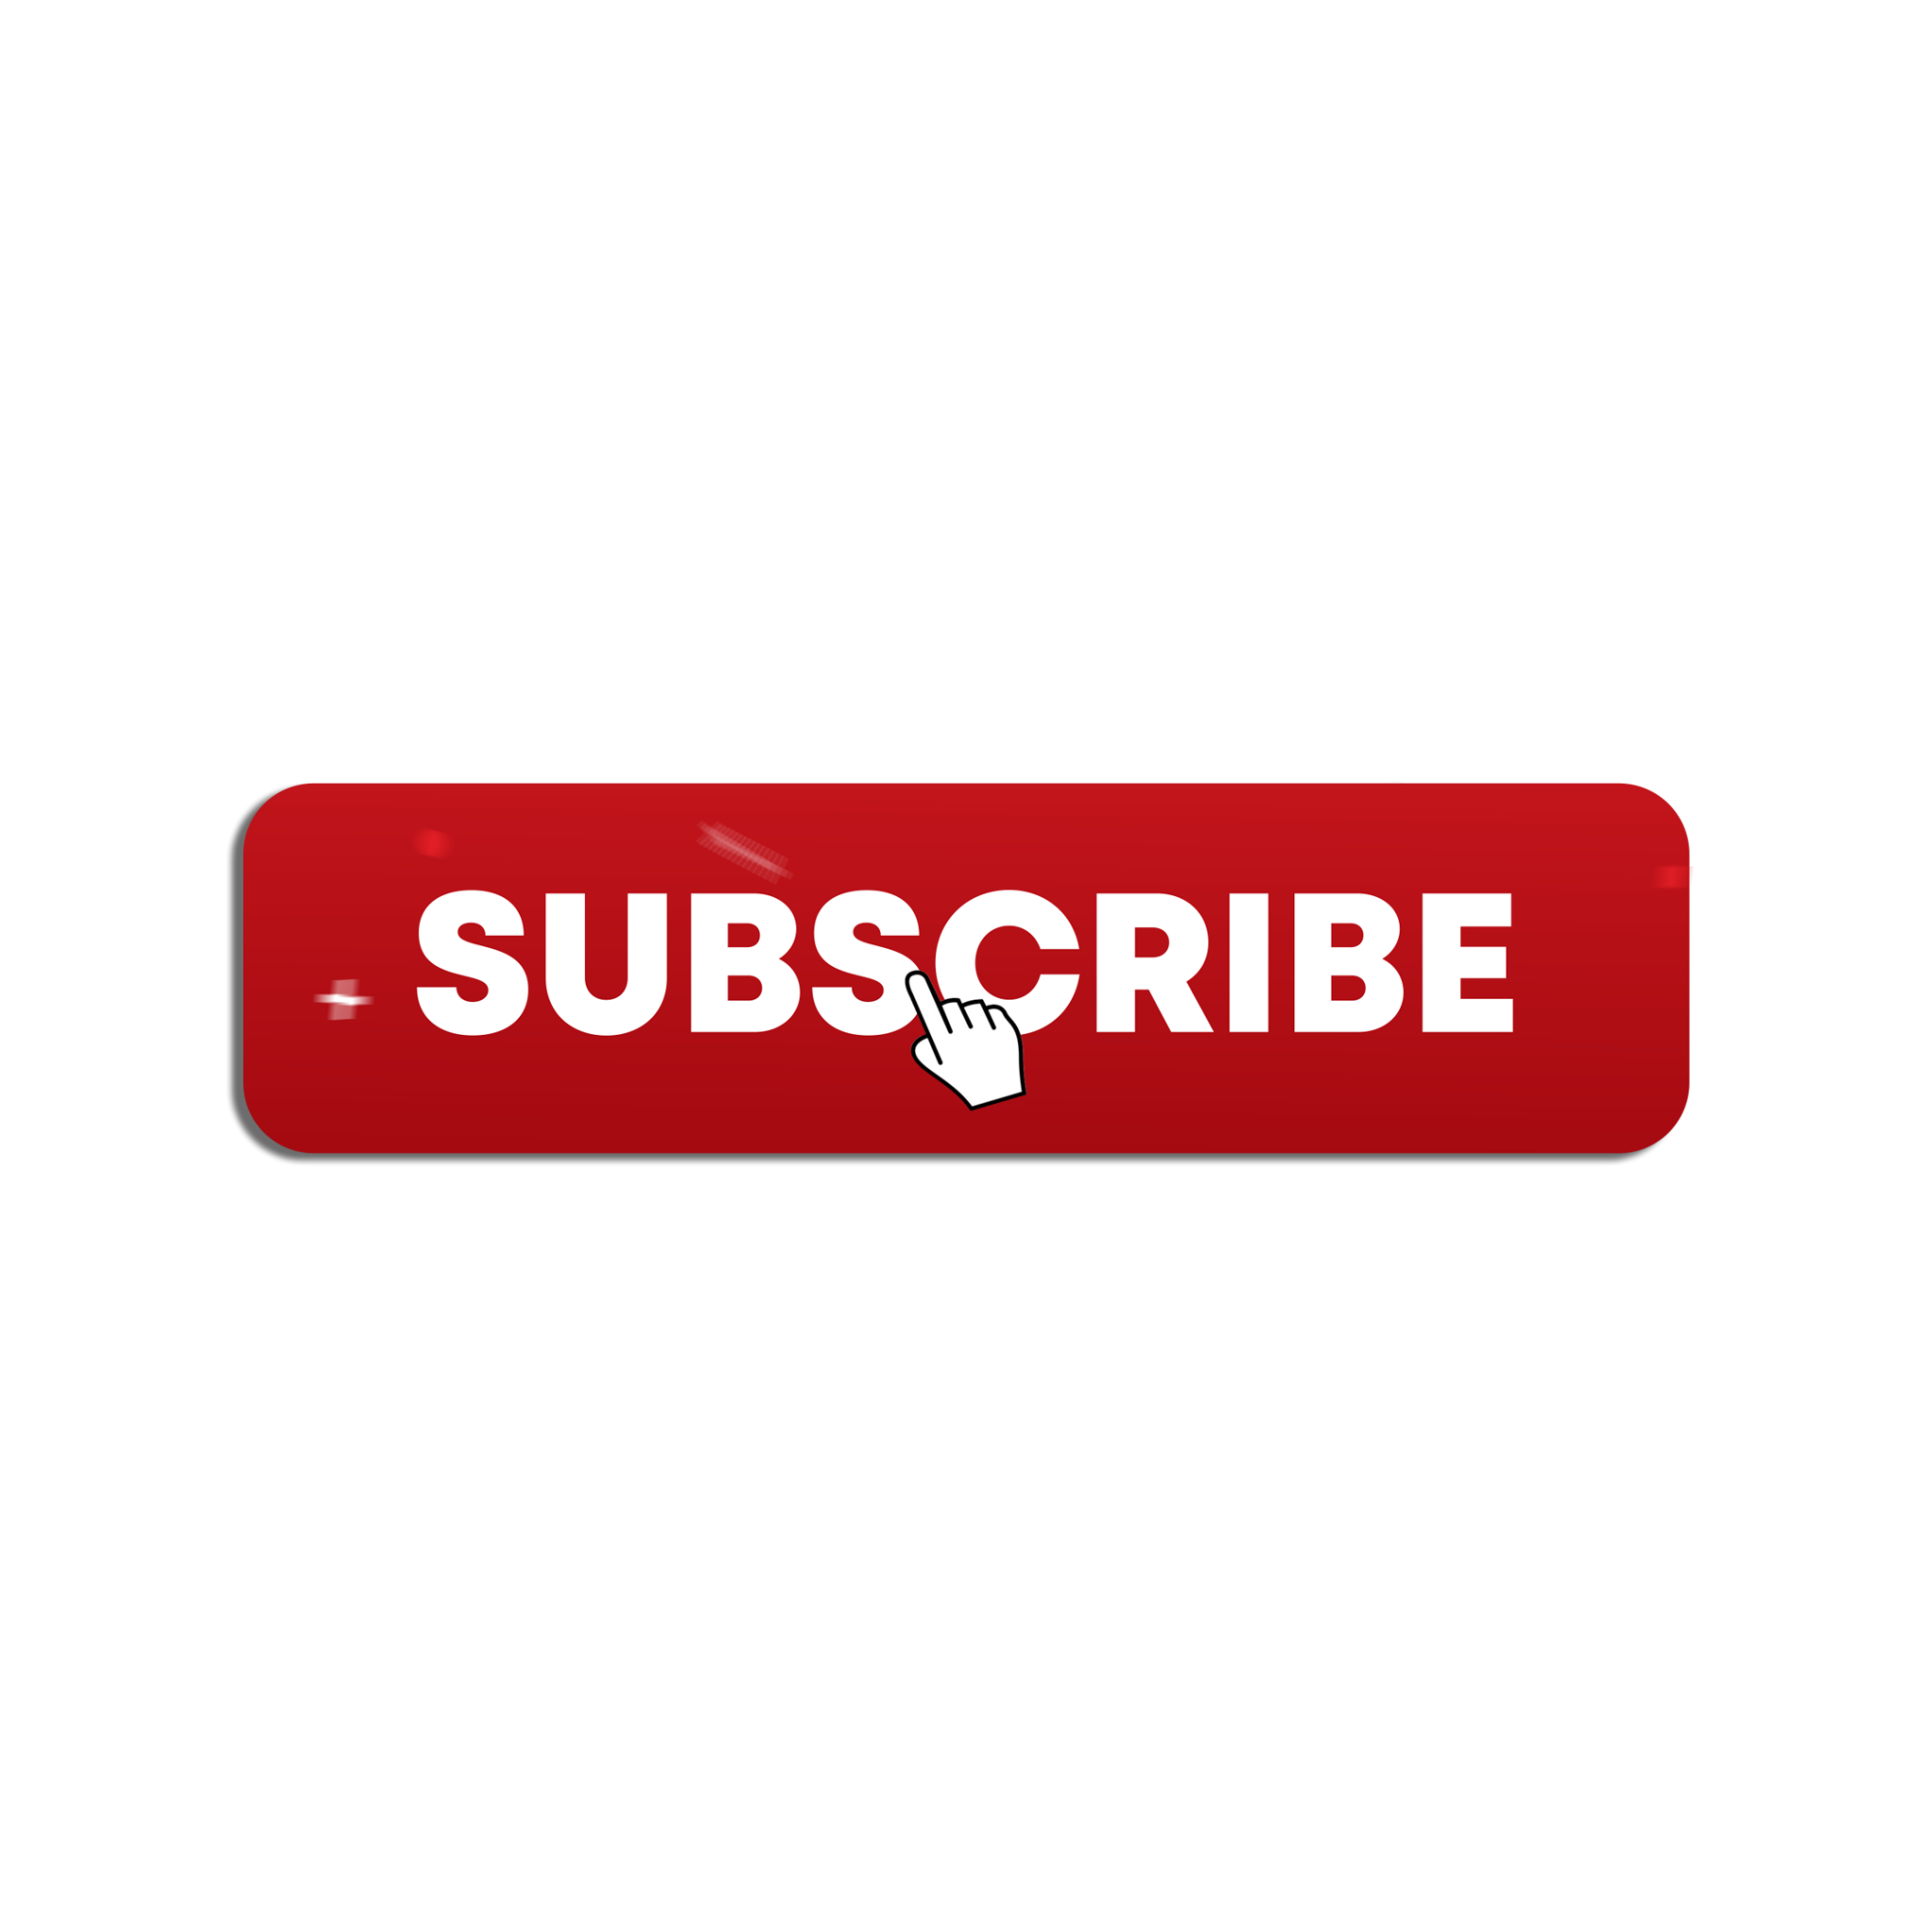 Single Youtube Subscribe Button Png Image Download Mtc Tutorials